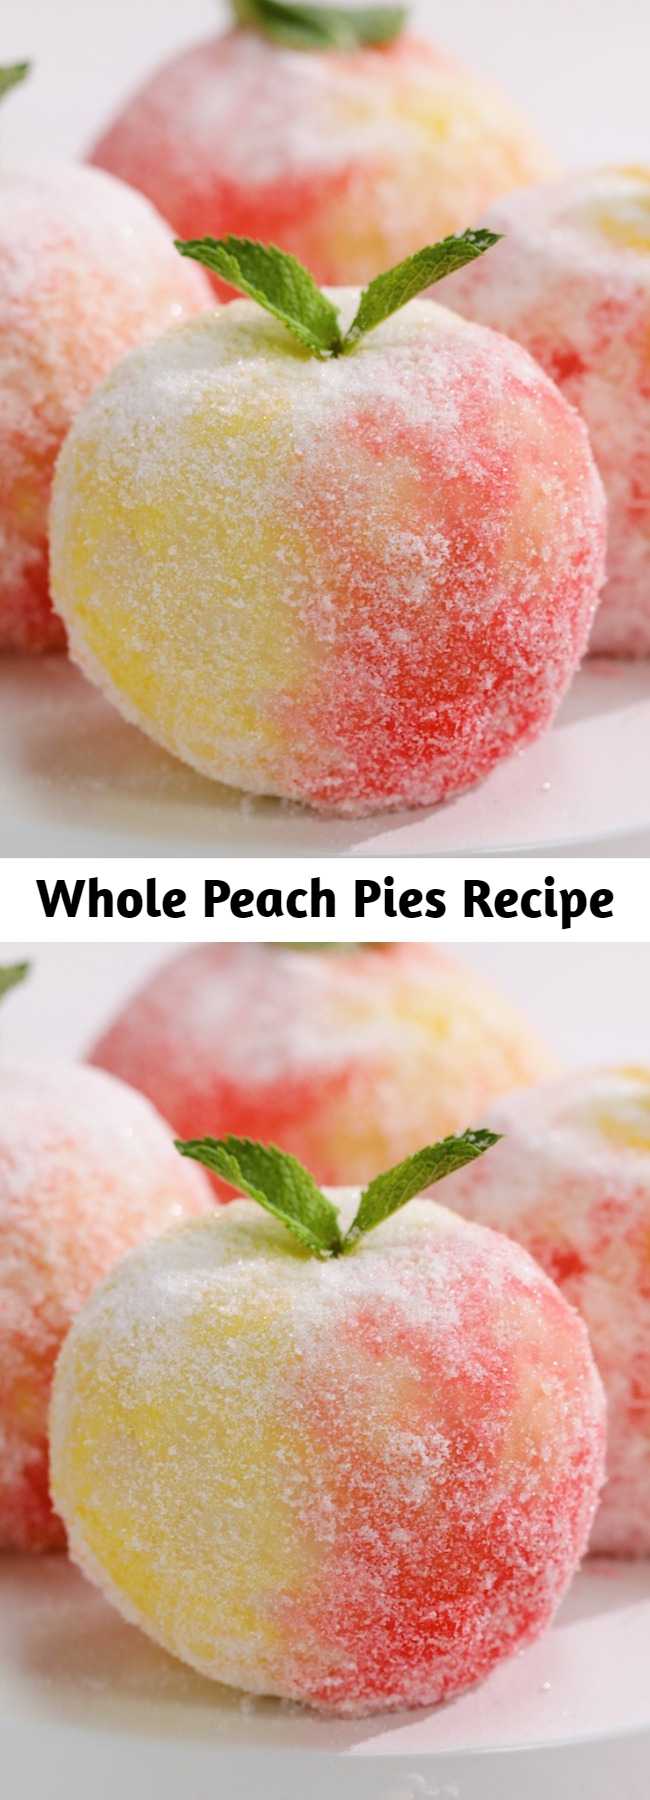 Whole Peach Pies Recipe - These pies will leave you s(peach)less.